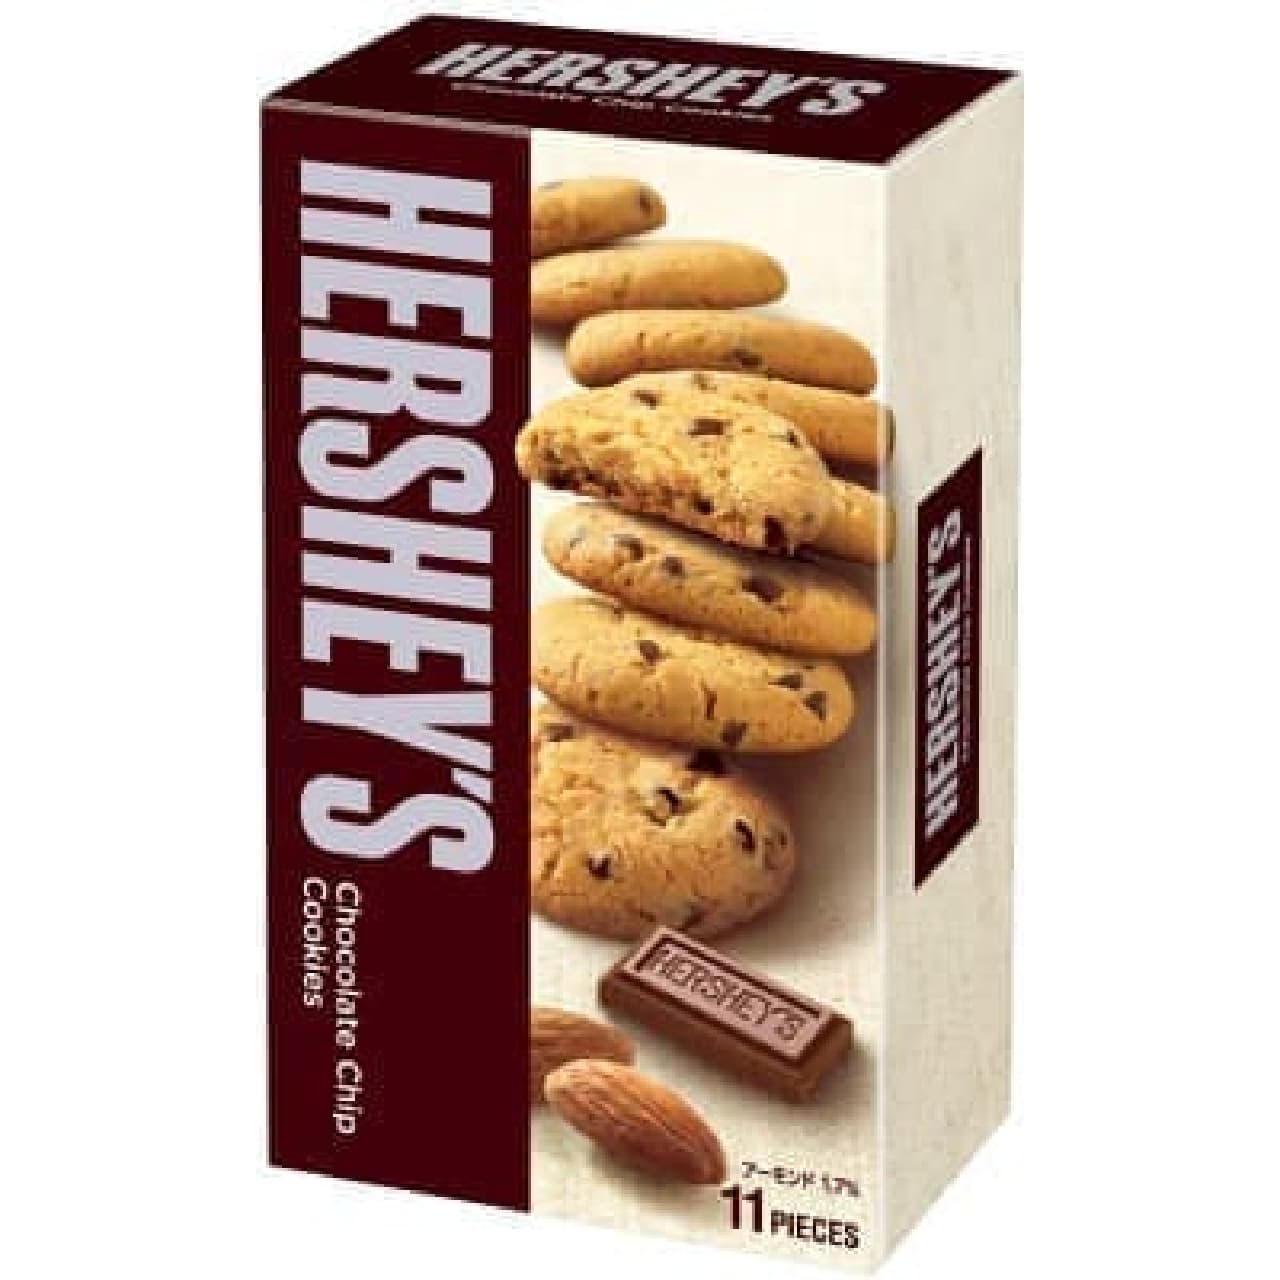 Popular chocolate brand "Hershey's" cookies are now available!